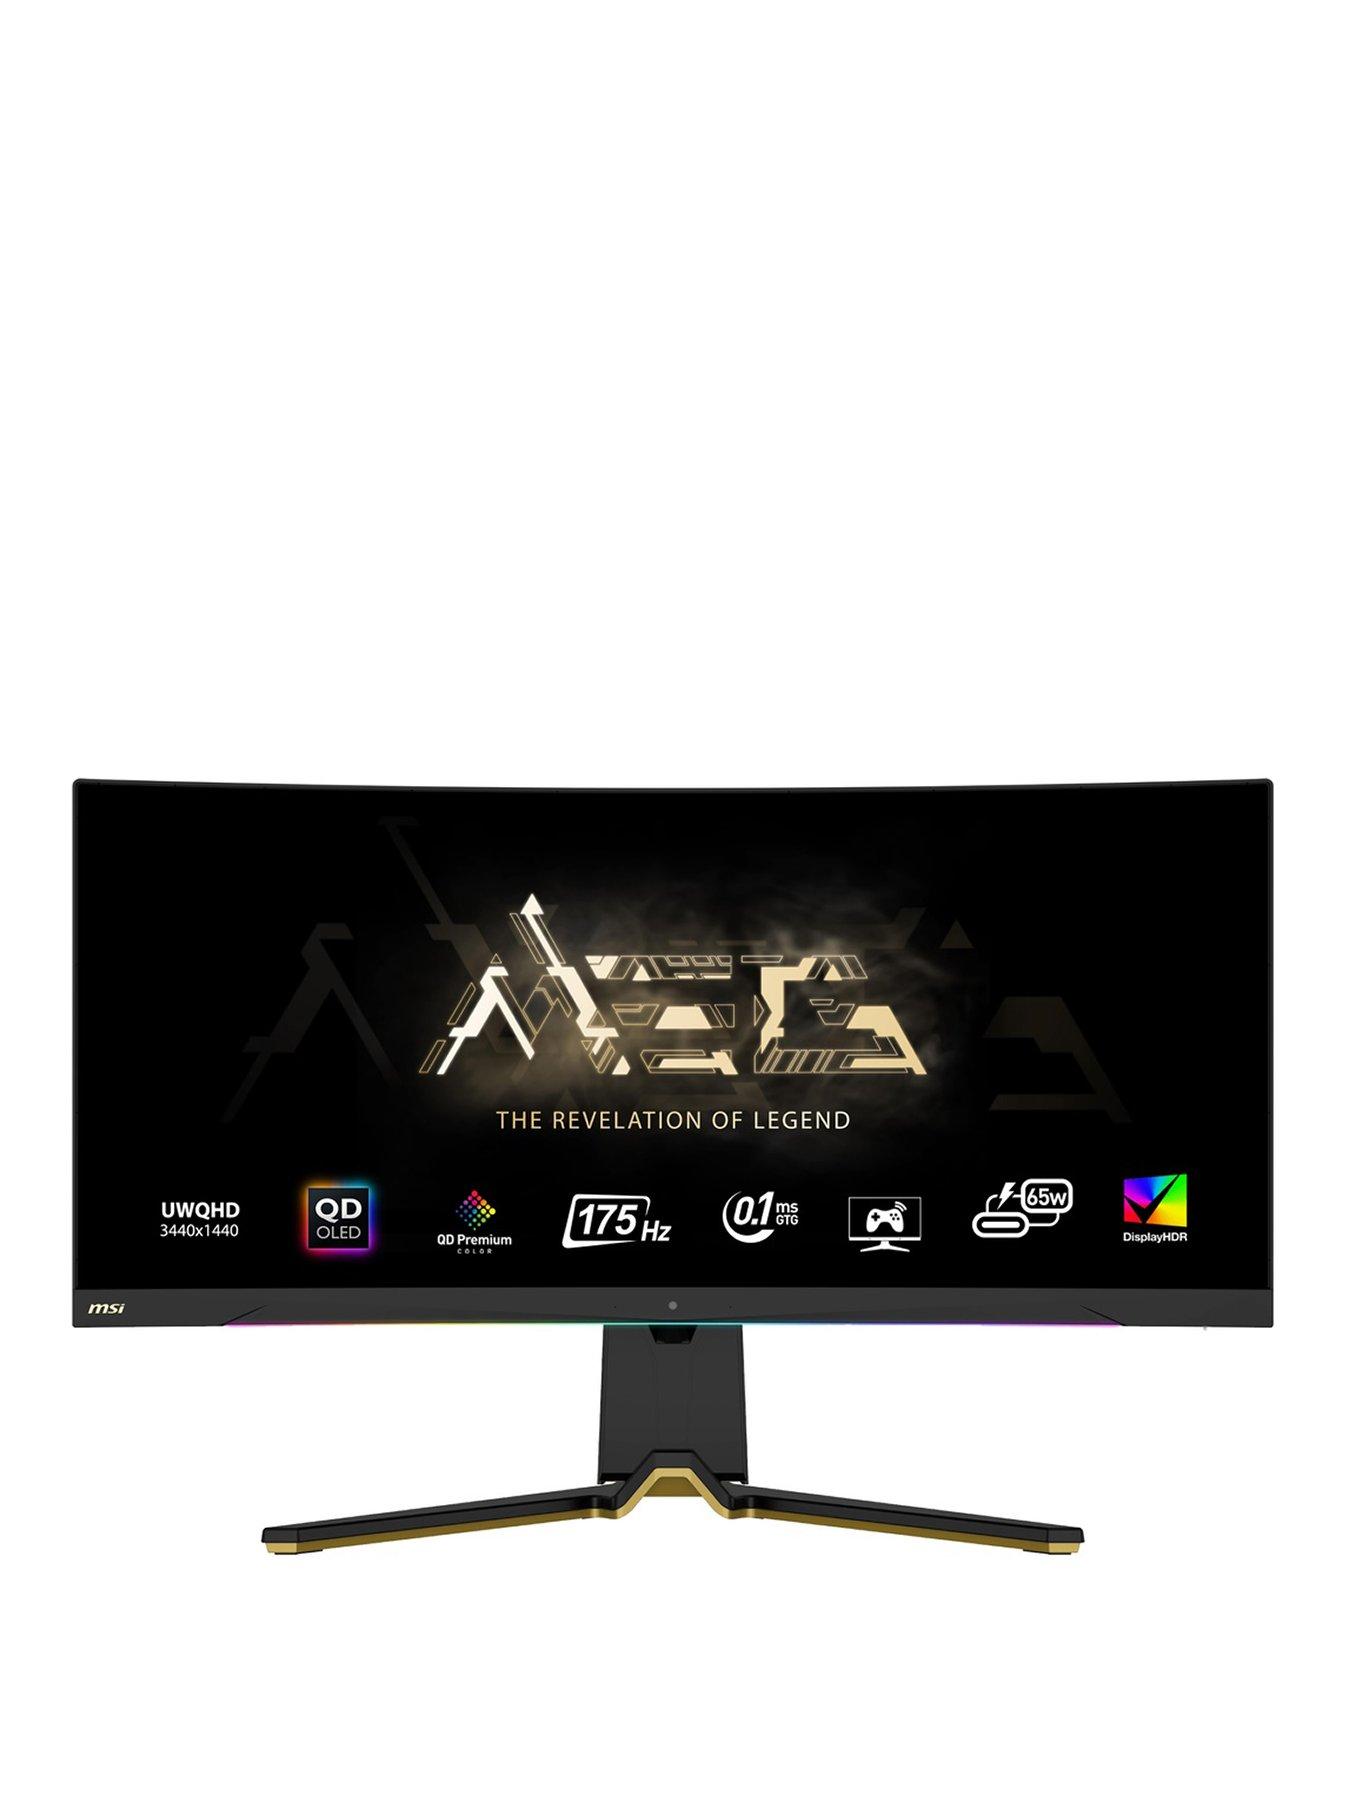 Acer Nitro 27” 1000R Curved 2560x1440P 2K 240Hz Refresh rate Up to 0.5ms  response time VESA HDR400 AMD FreeSync Premium Adjustable Stand Gaming